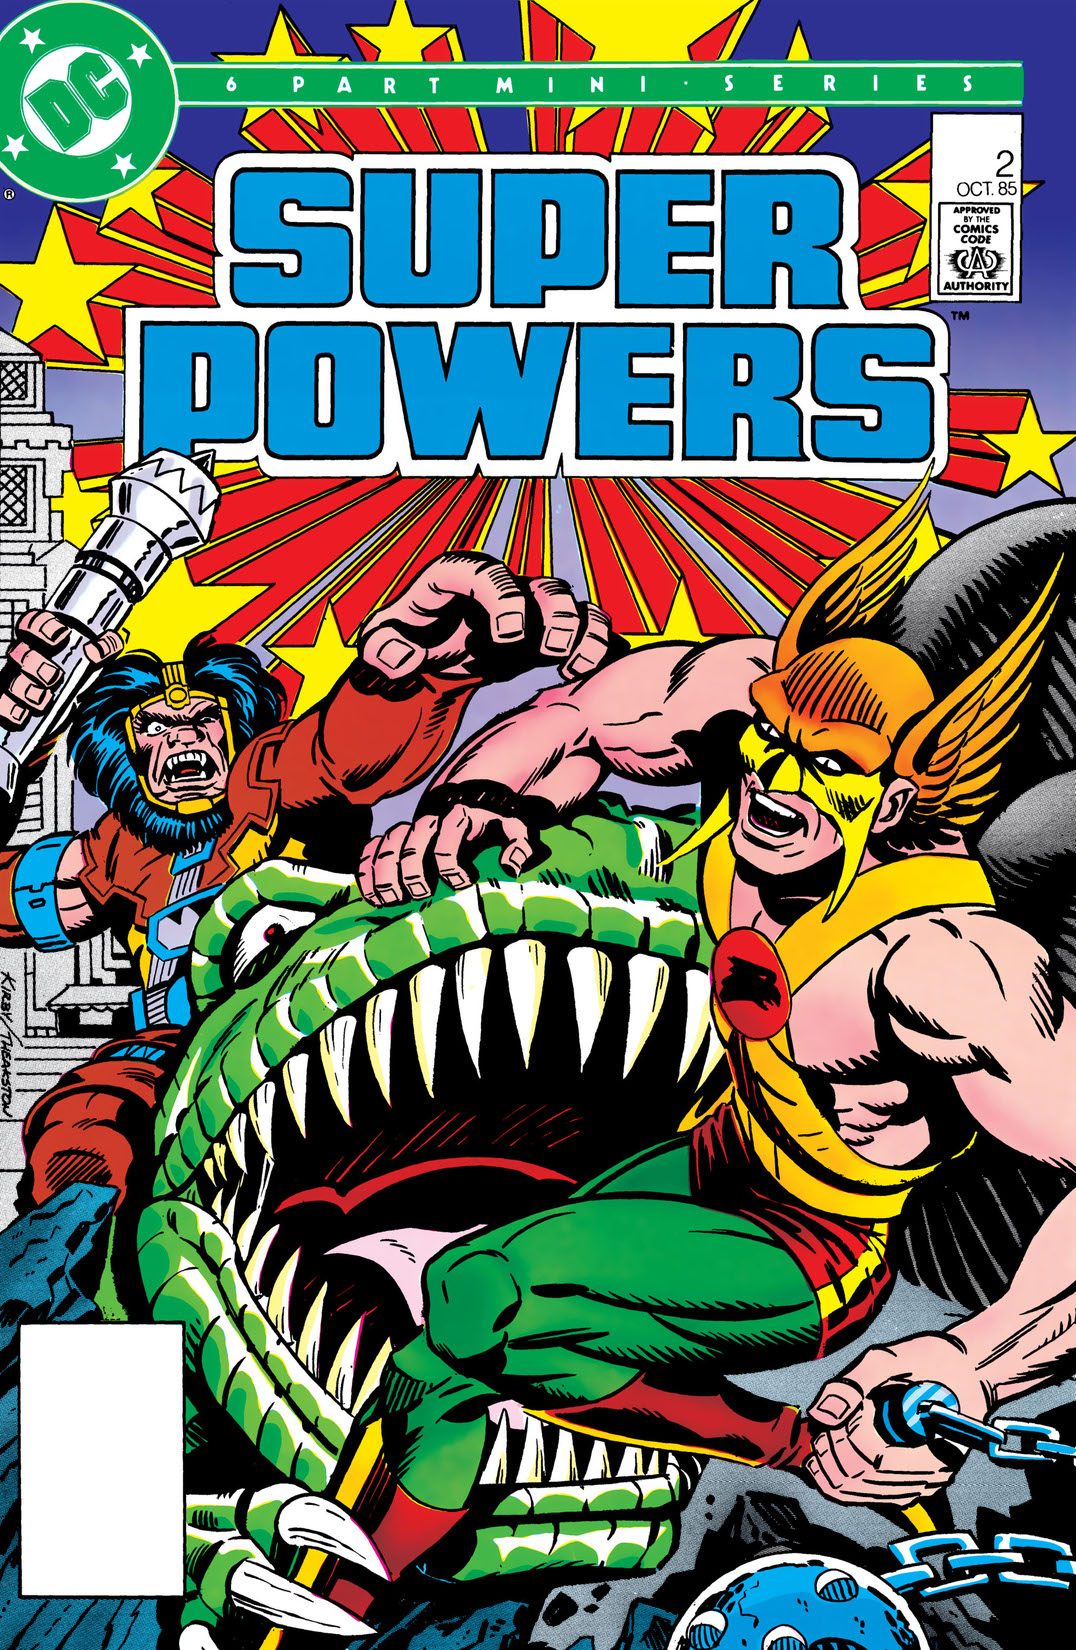 Super Powers (1985-) #2 preview images